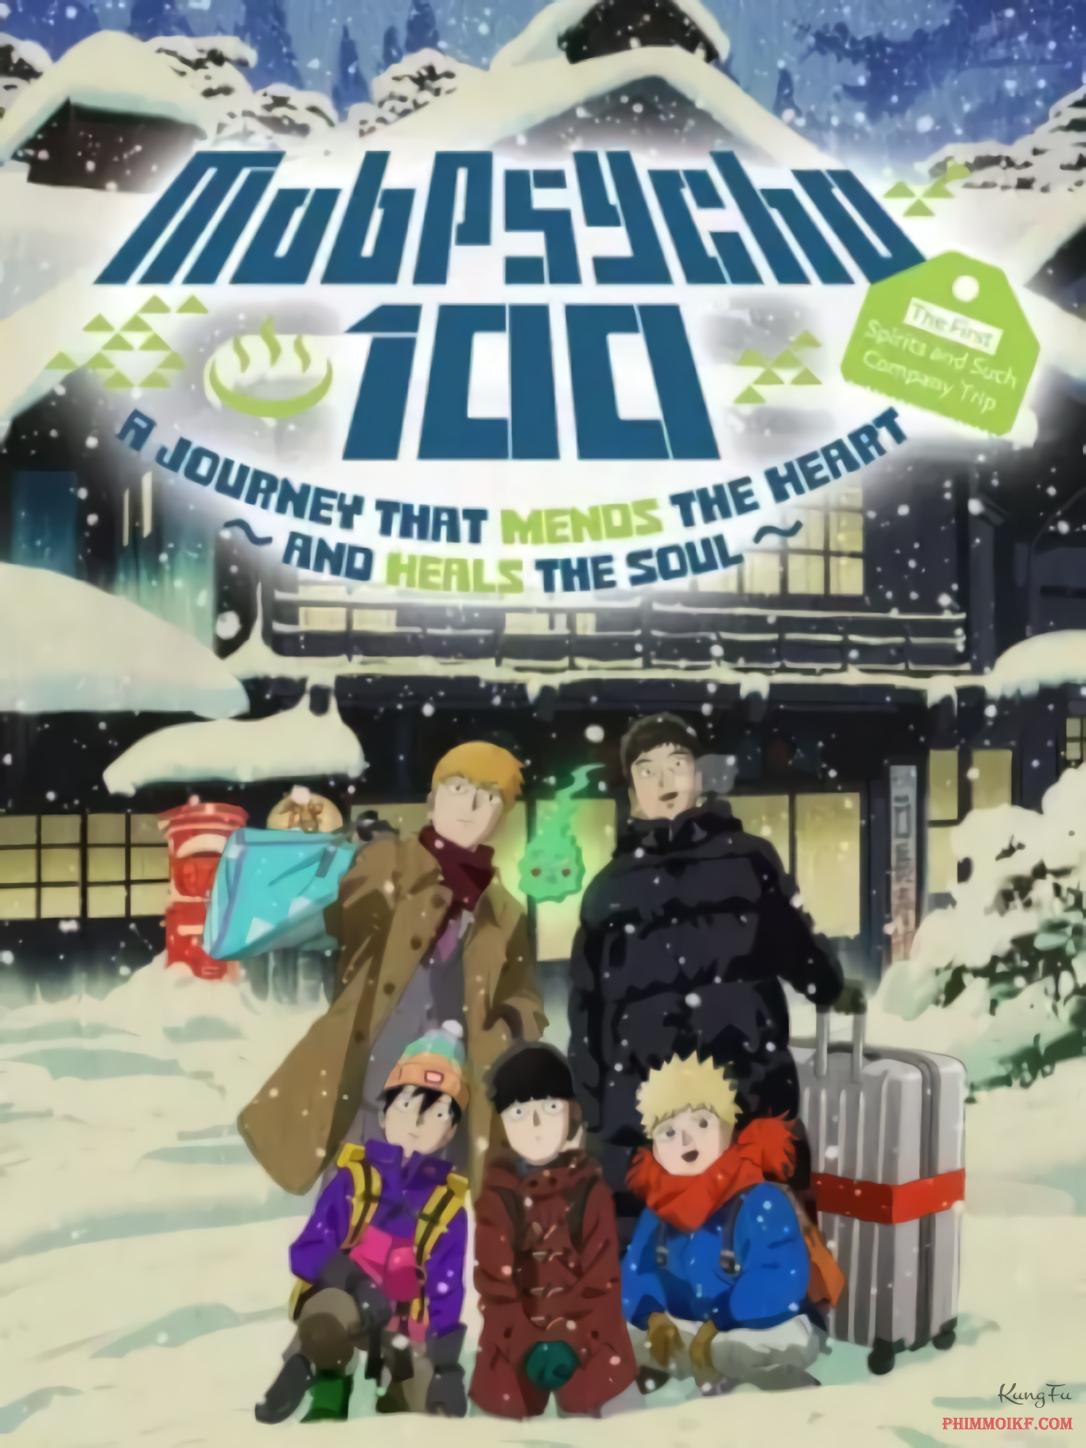 Mob Psycho 100: The Spirits and Such Consultation Office's First Company Outing - A Healing Trip That Warms the Heart